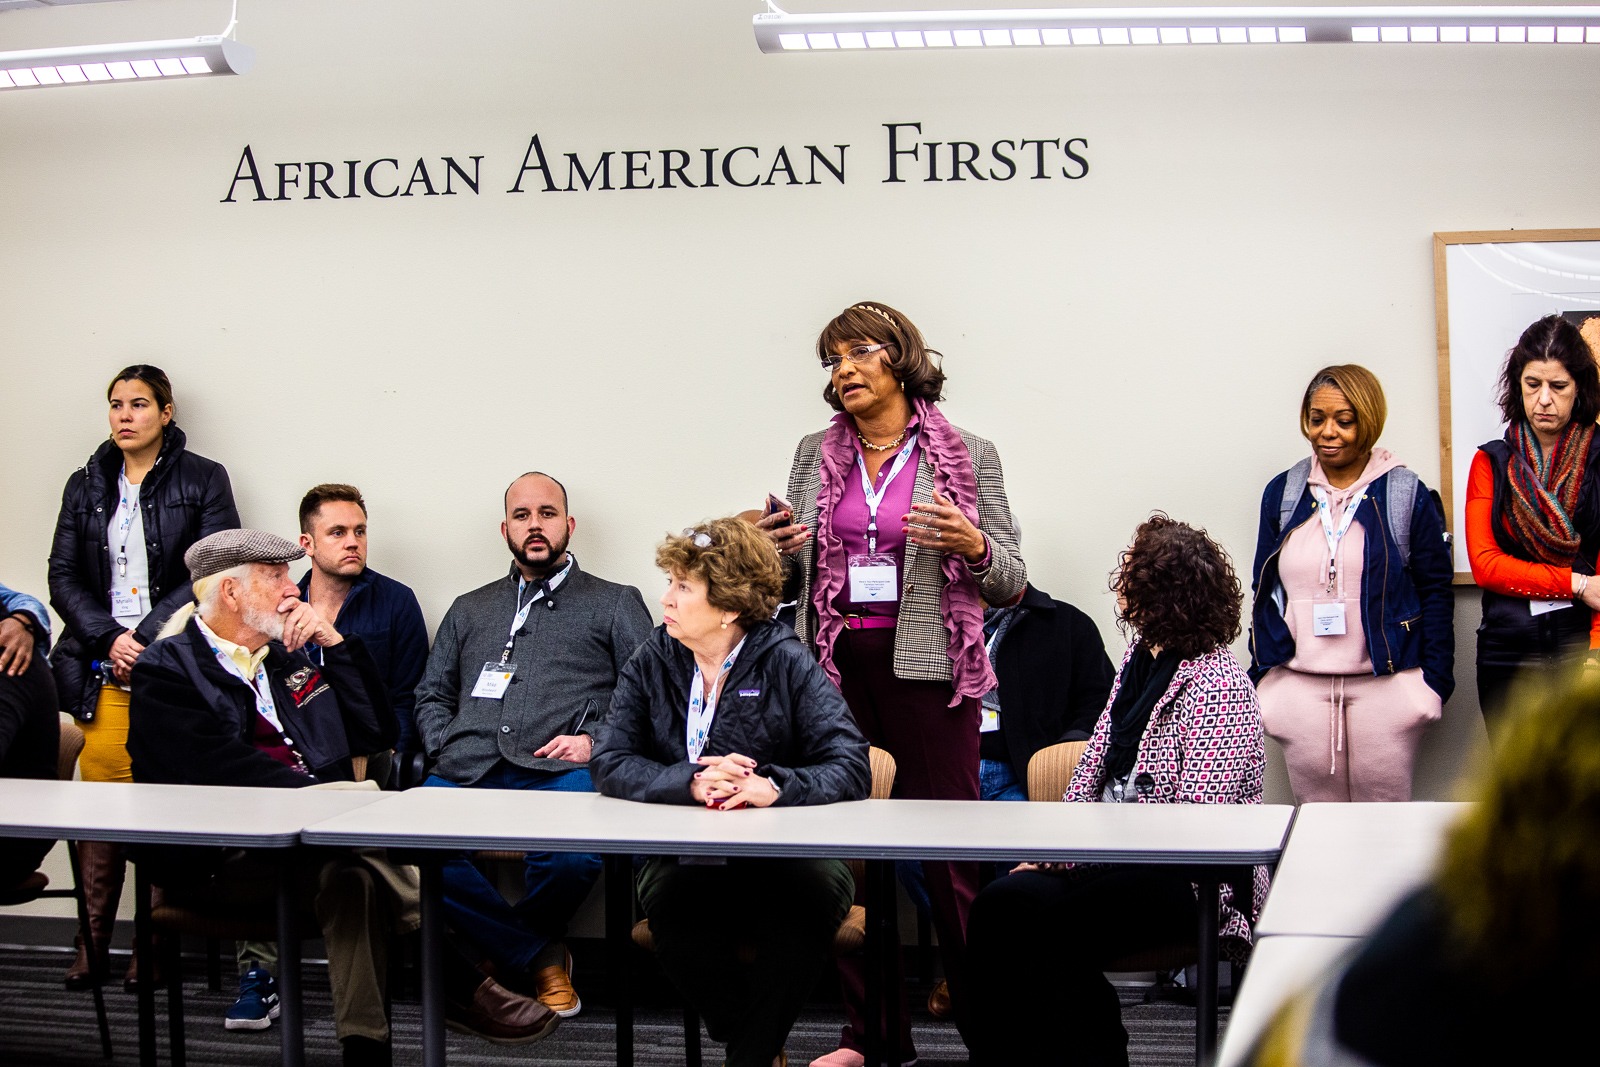 Pamelya Herndon (standing center), WKKF CLN – Class Two, speaks with her peer fellows during a site visit to New Mexico in January 2020. In June 2021, Herndon was appointed as a member of the New Mexico House of Representatives serving Bernalillo County.